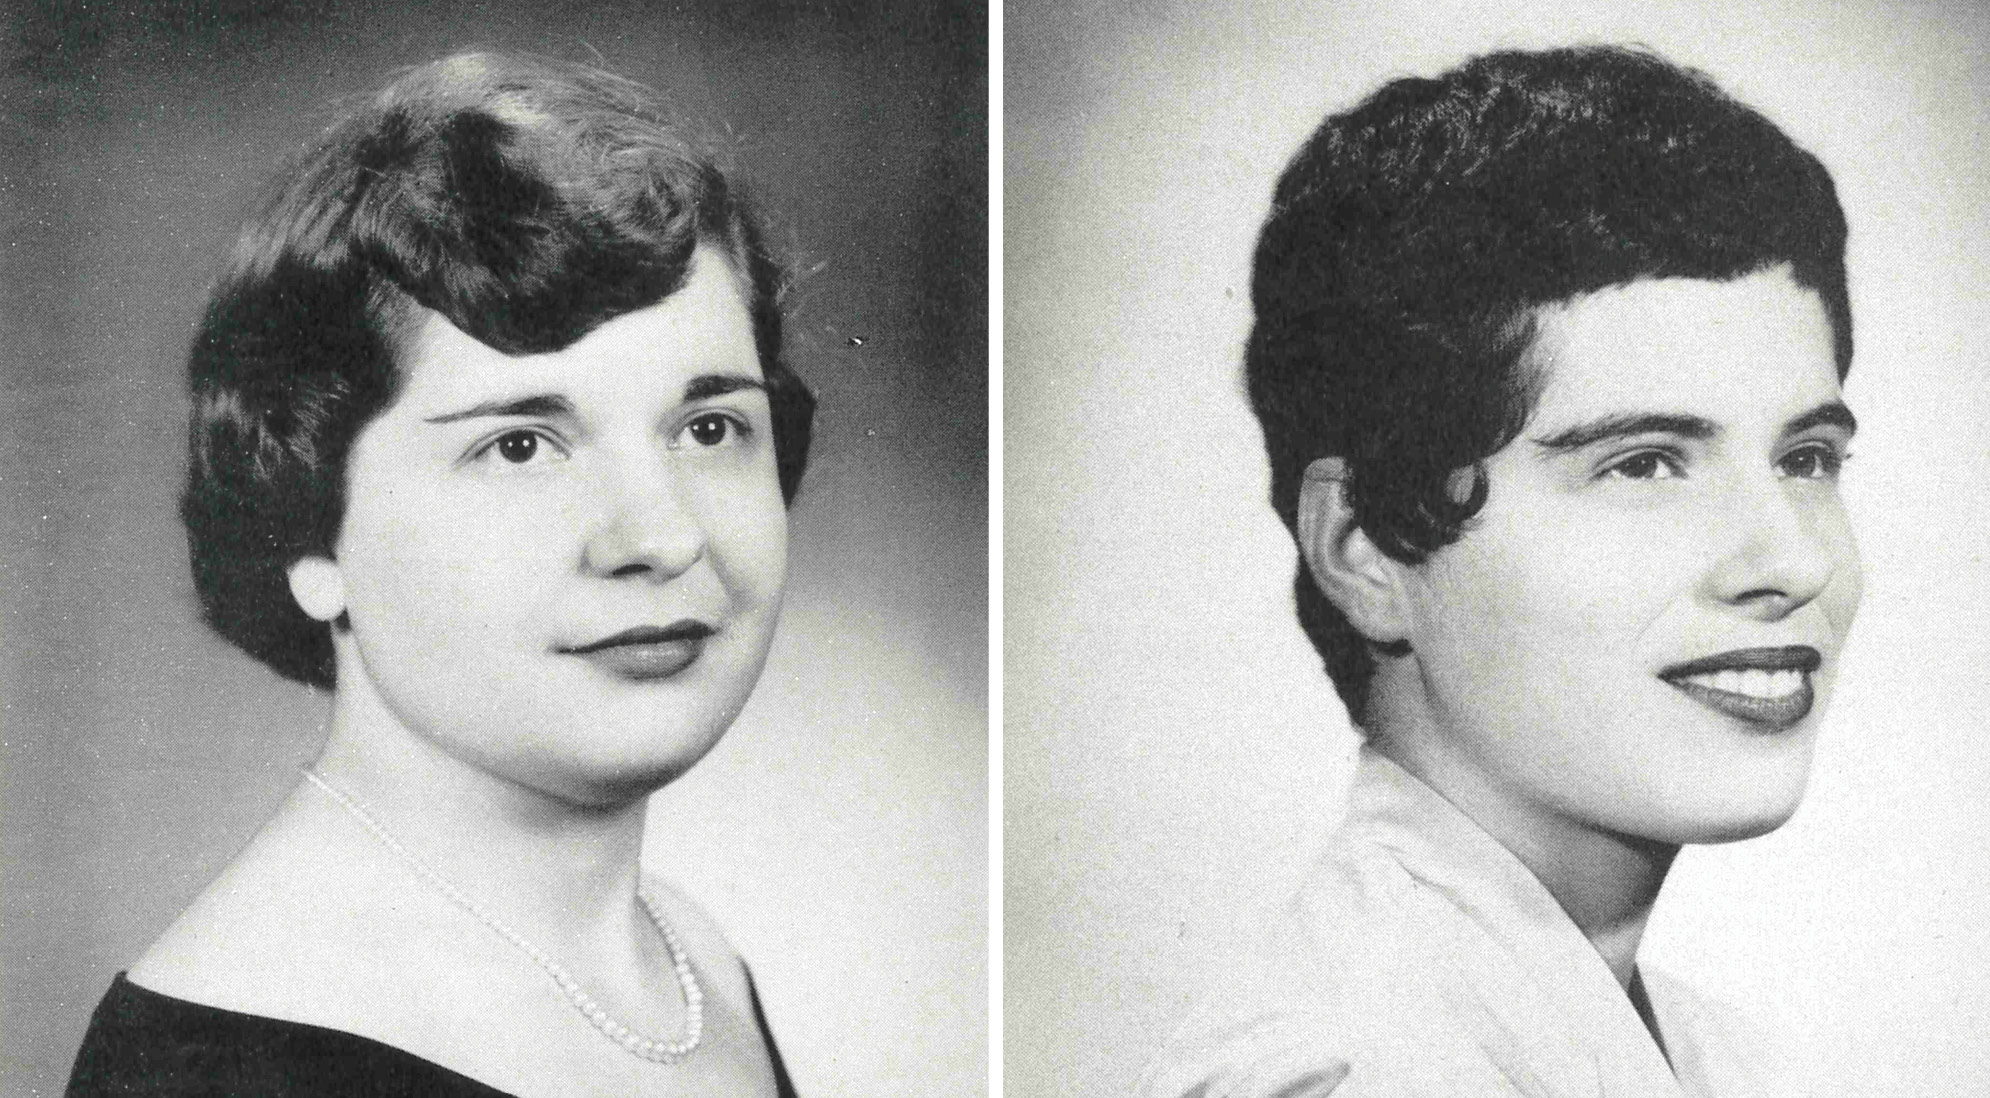 Black and white portraits of two donors